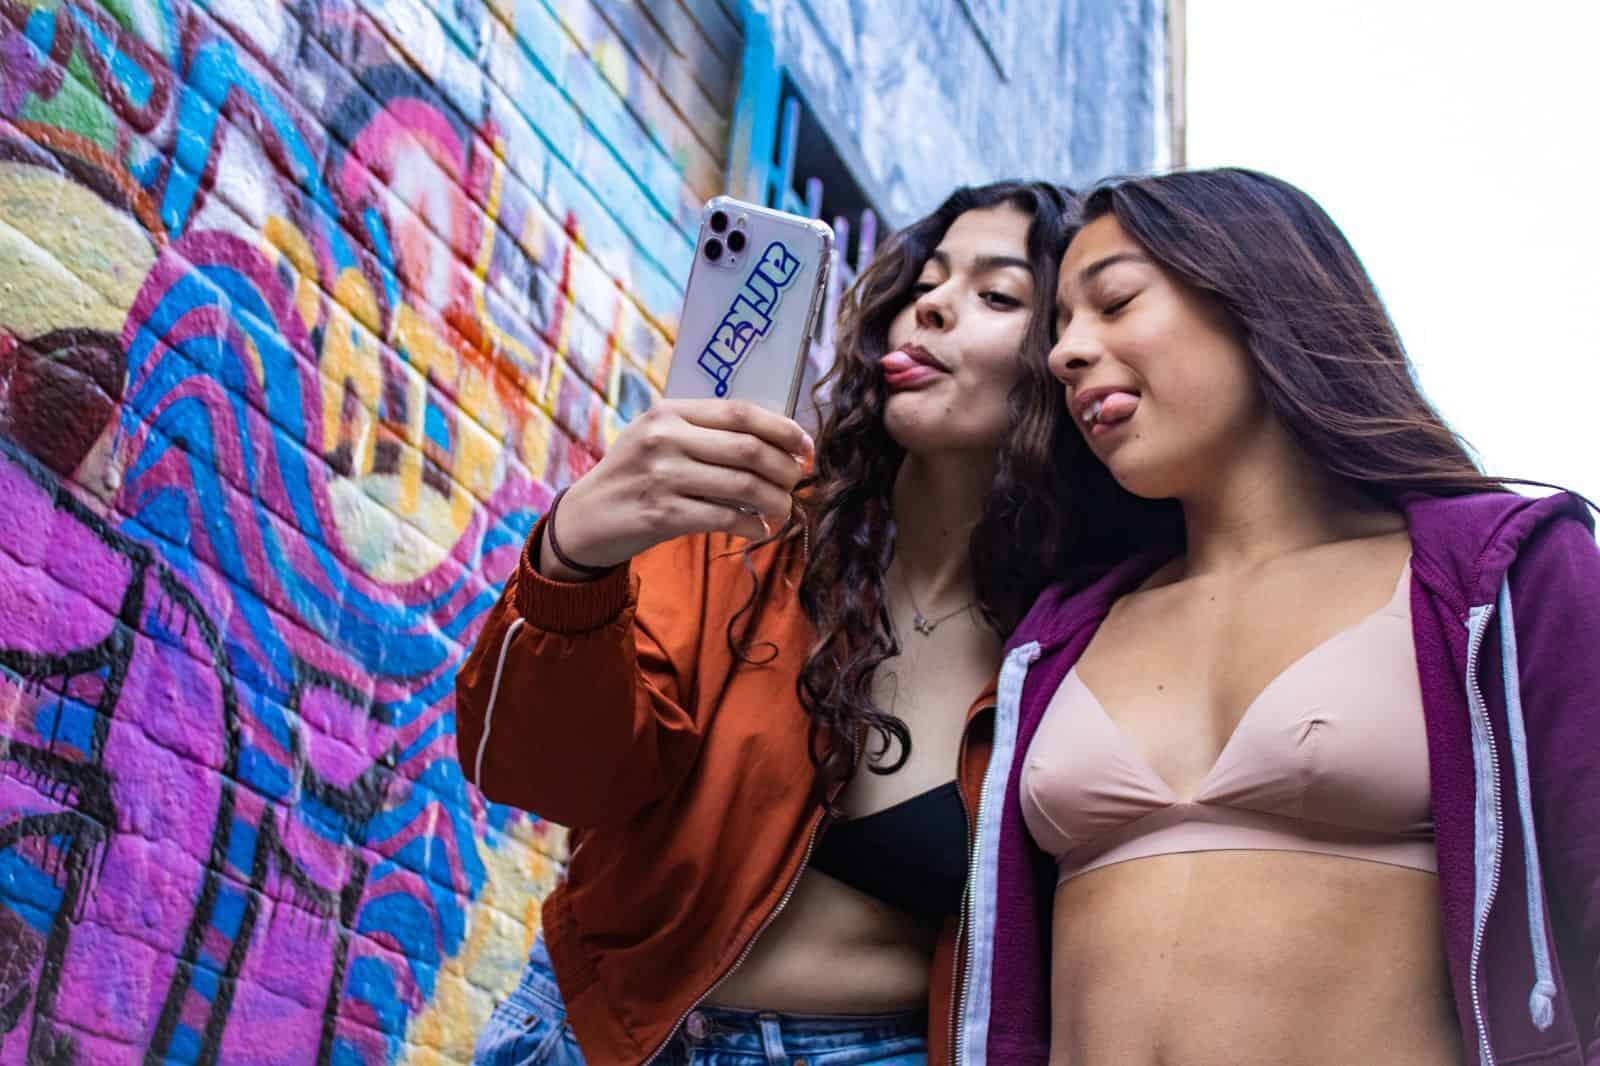 Sustainable bra made of recycled material that grows along with young girls